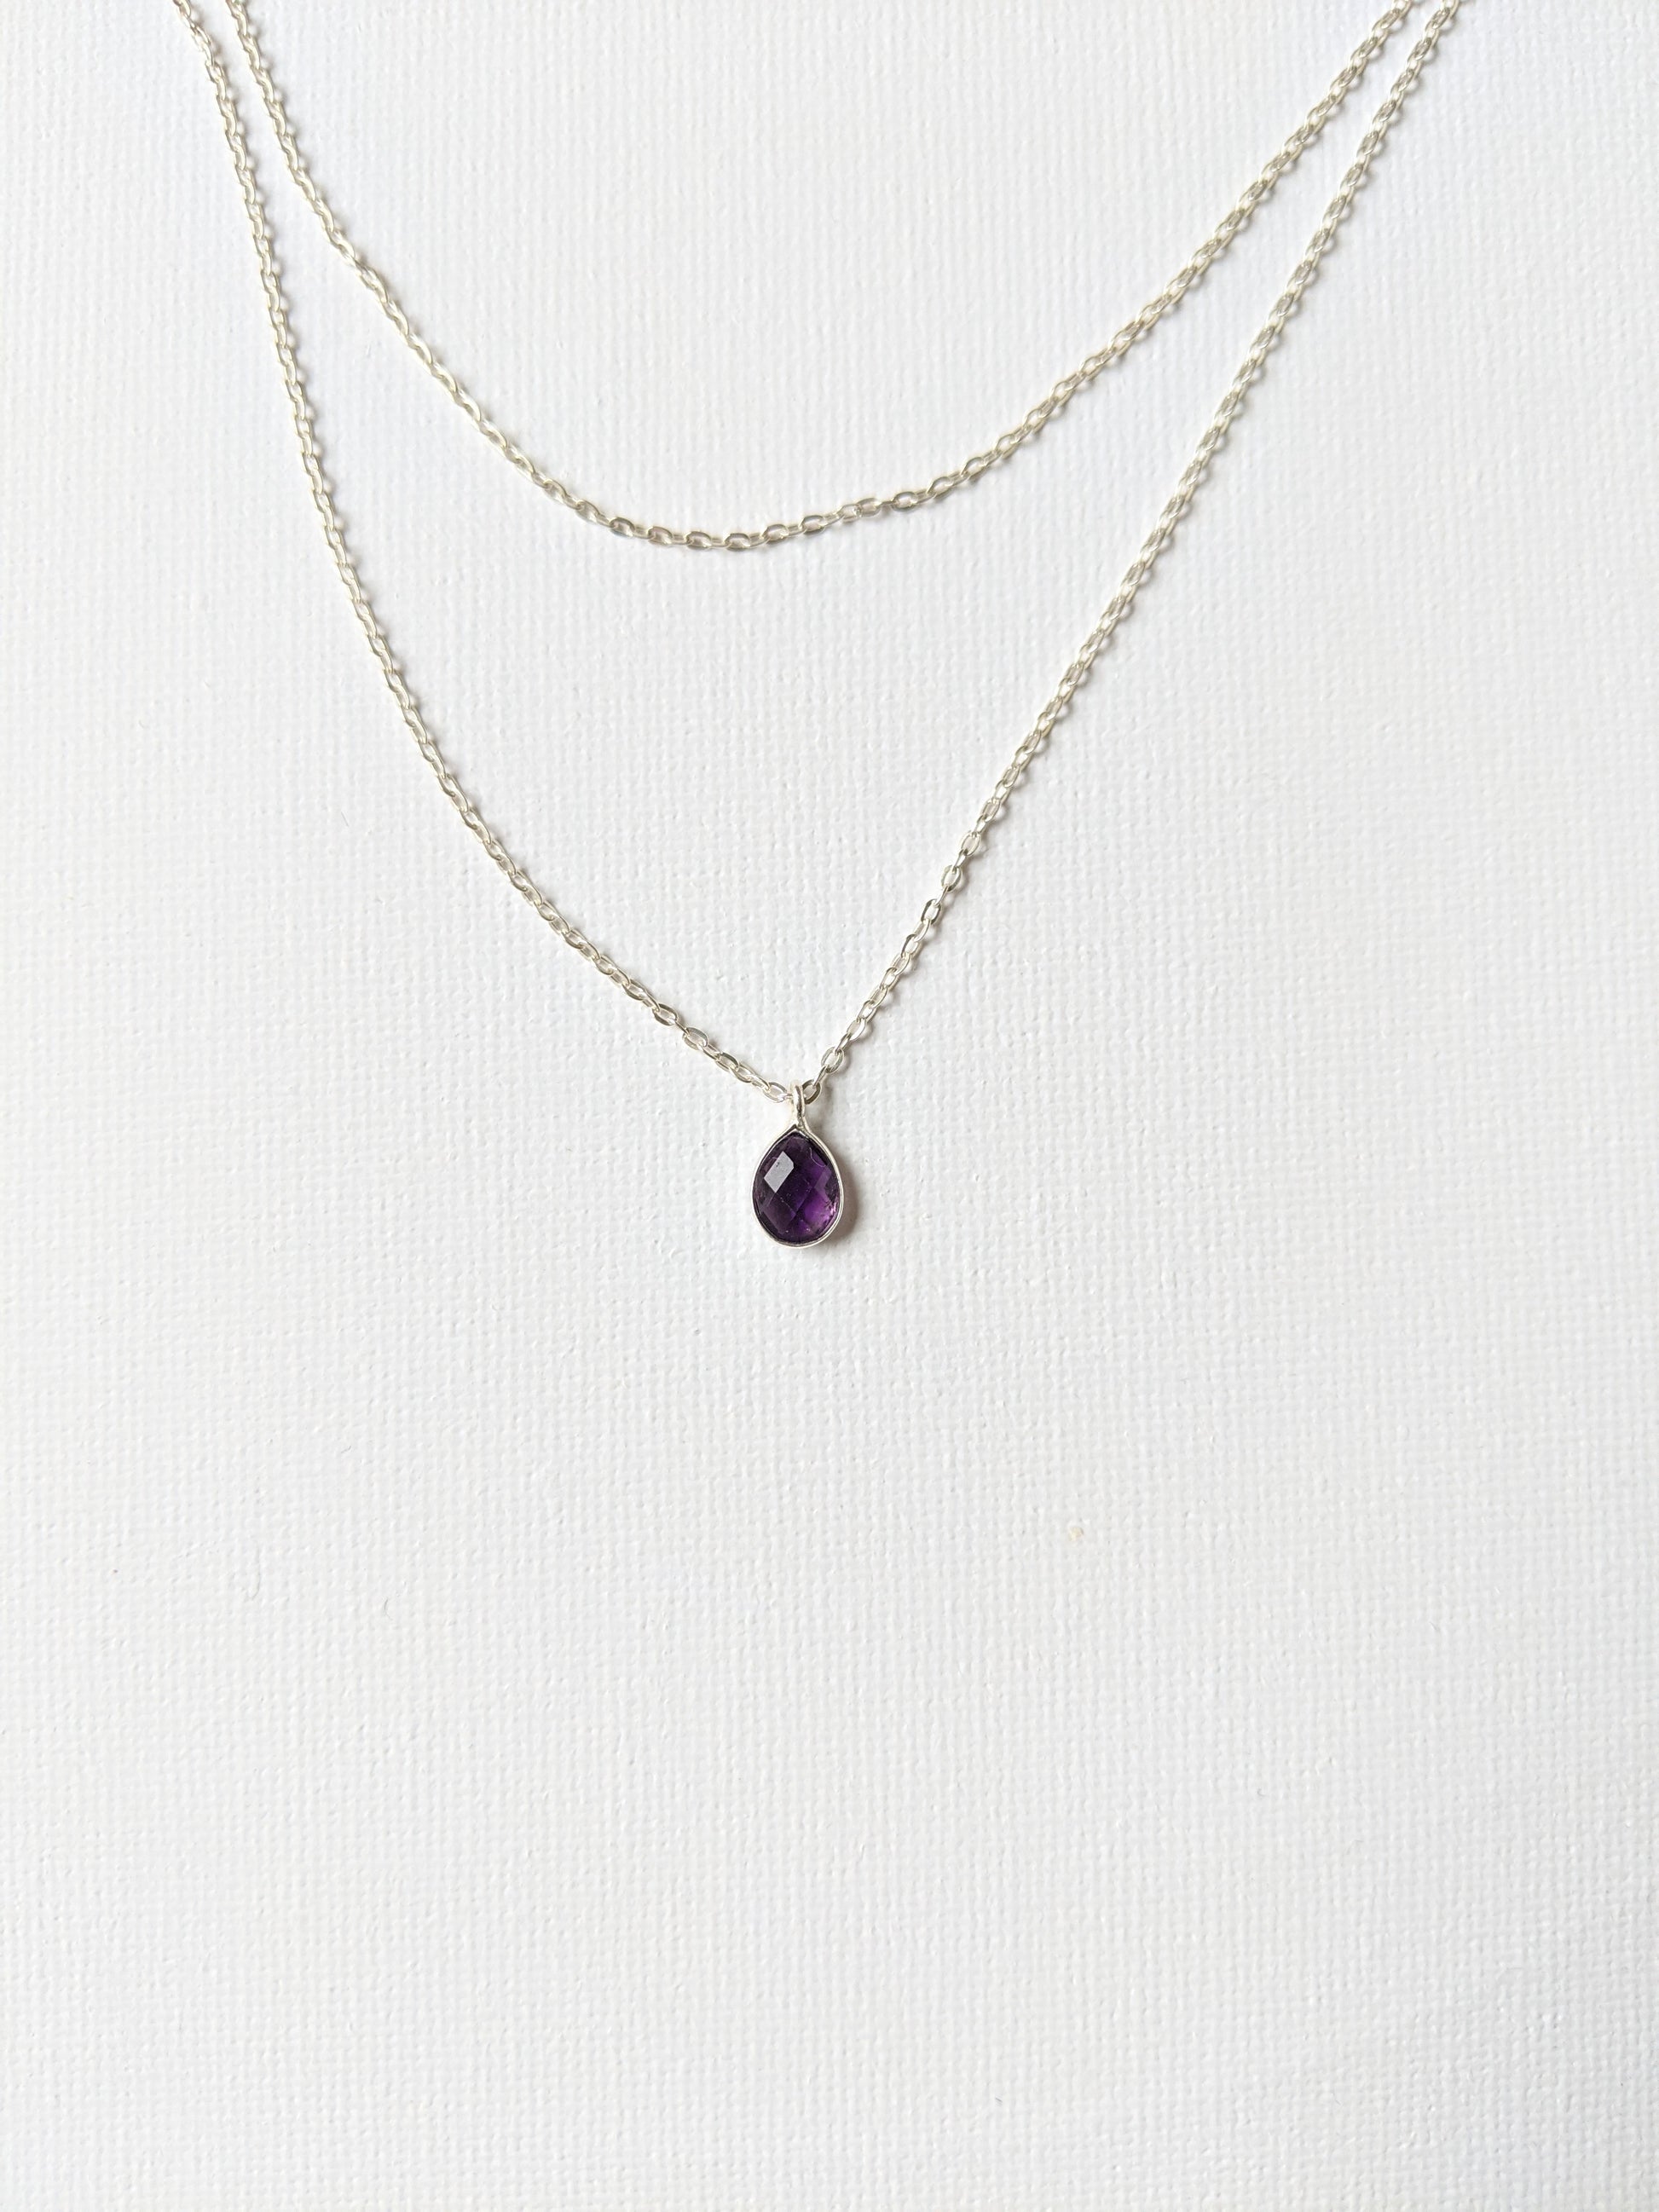 Moon & Milk - Handmade sterling silver necklace with a tiny amethyst faceted stone pendant.